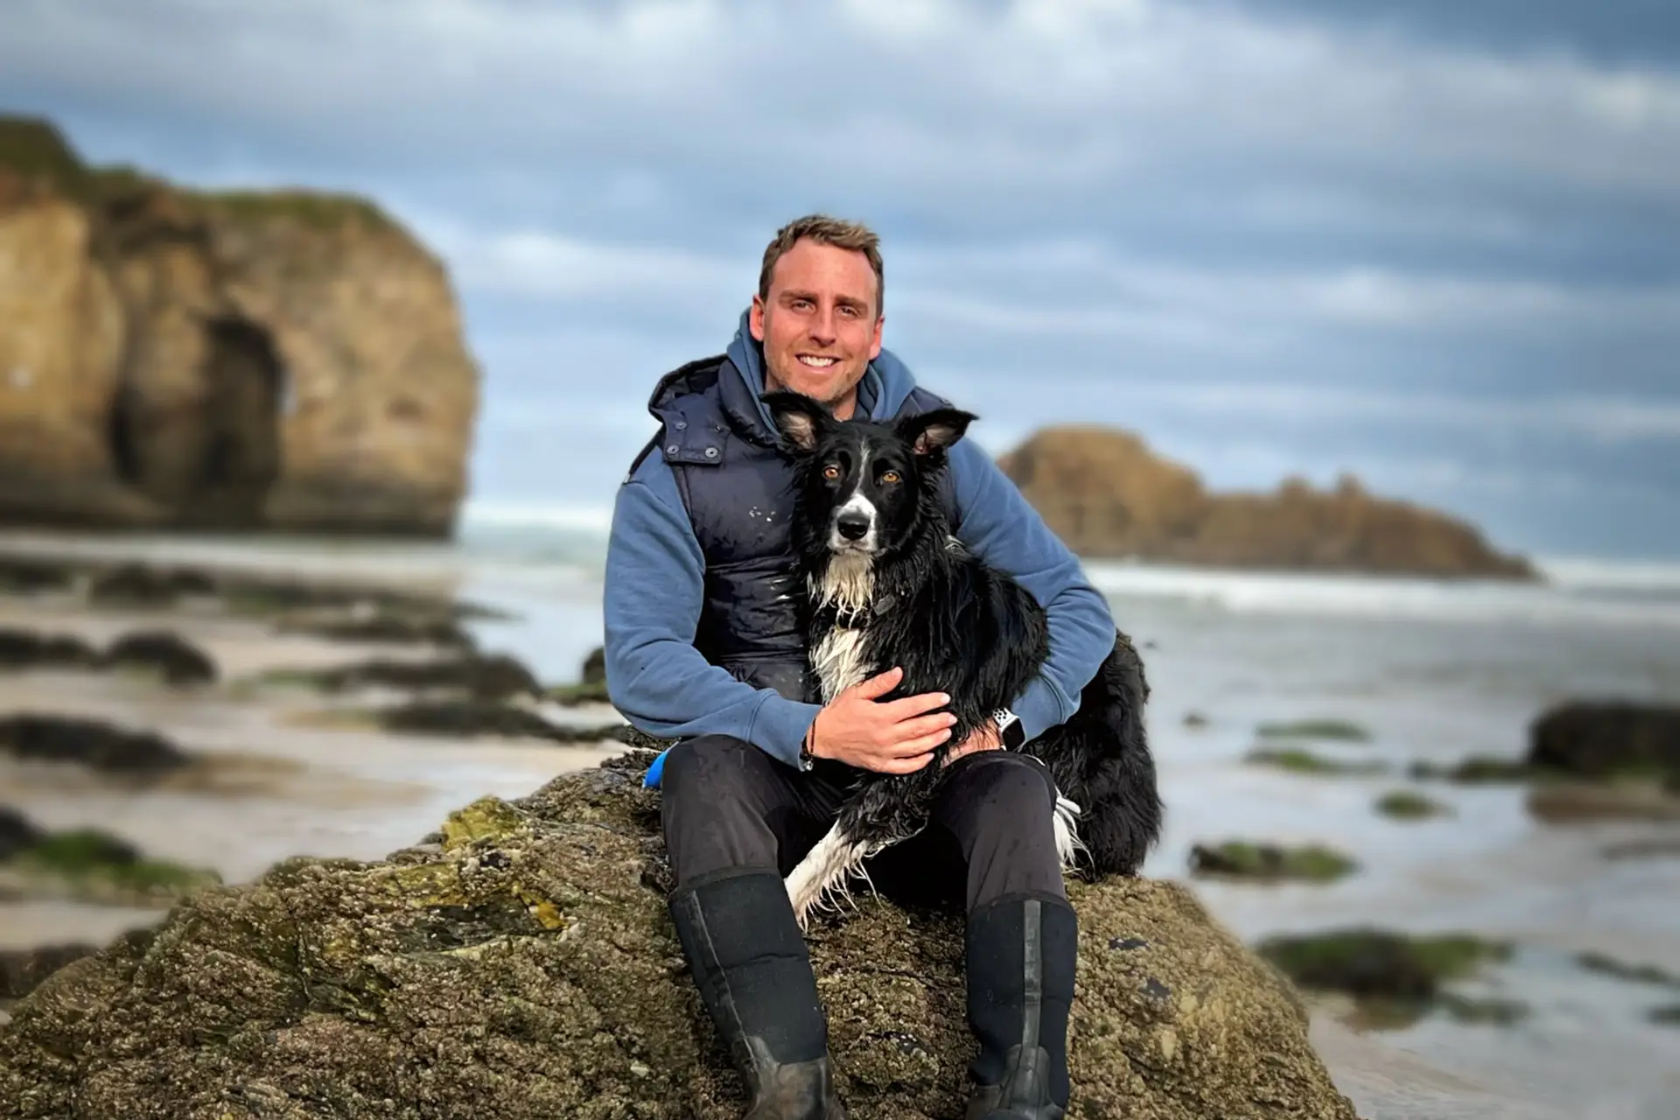 World-class agility trainer Dave Munnings on a sandy beach with his dog